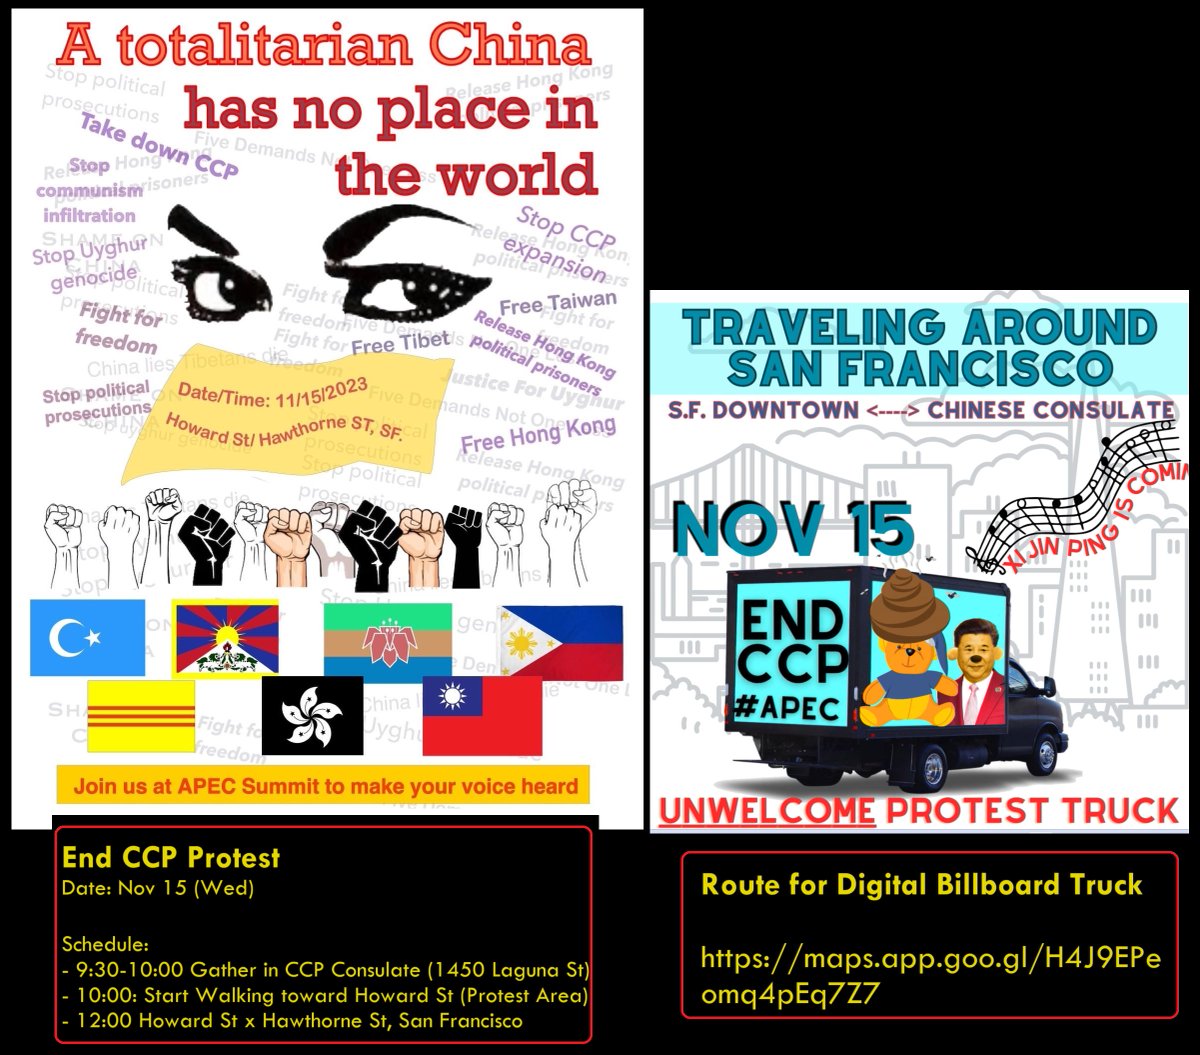 See you all at Nov 15th Protest. We also have a 'Digital Billboard Truck' driving around the San Francisco